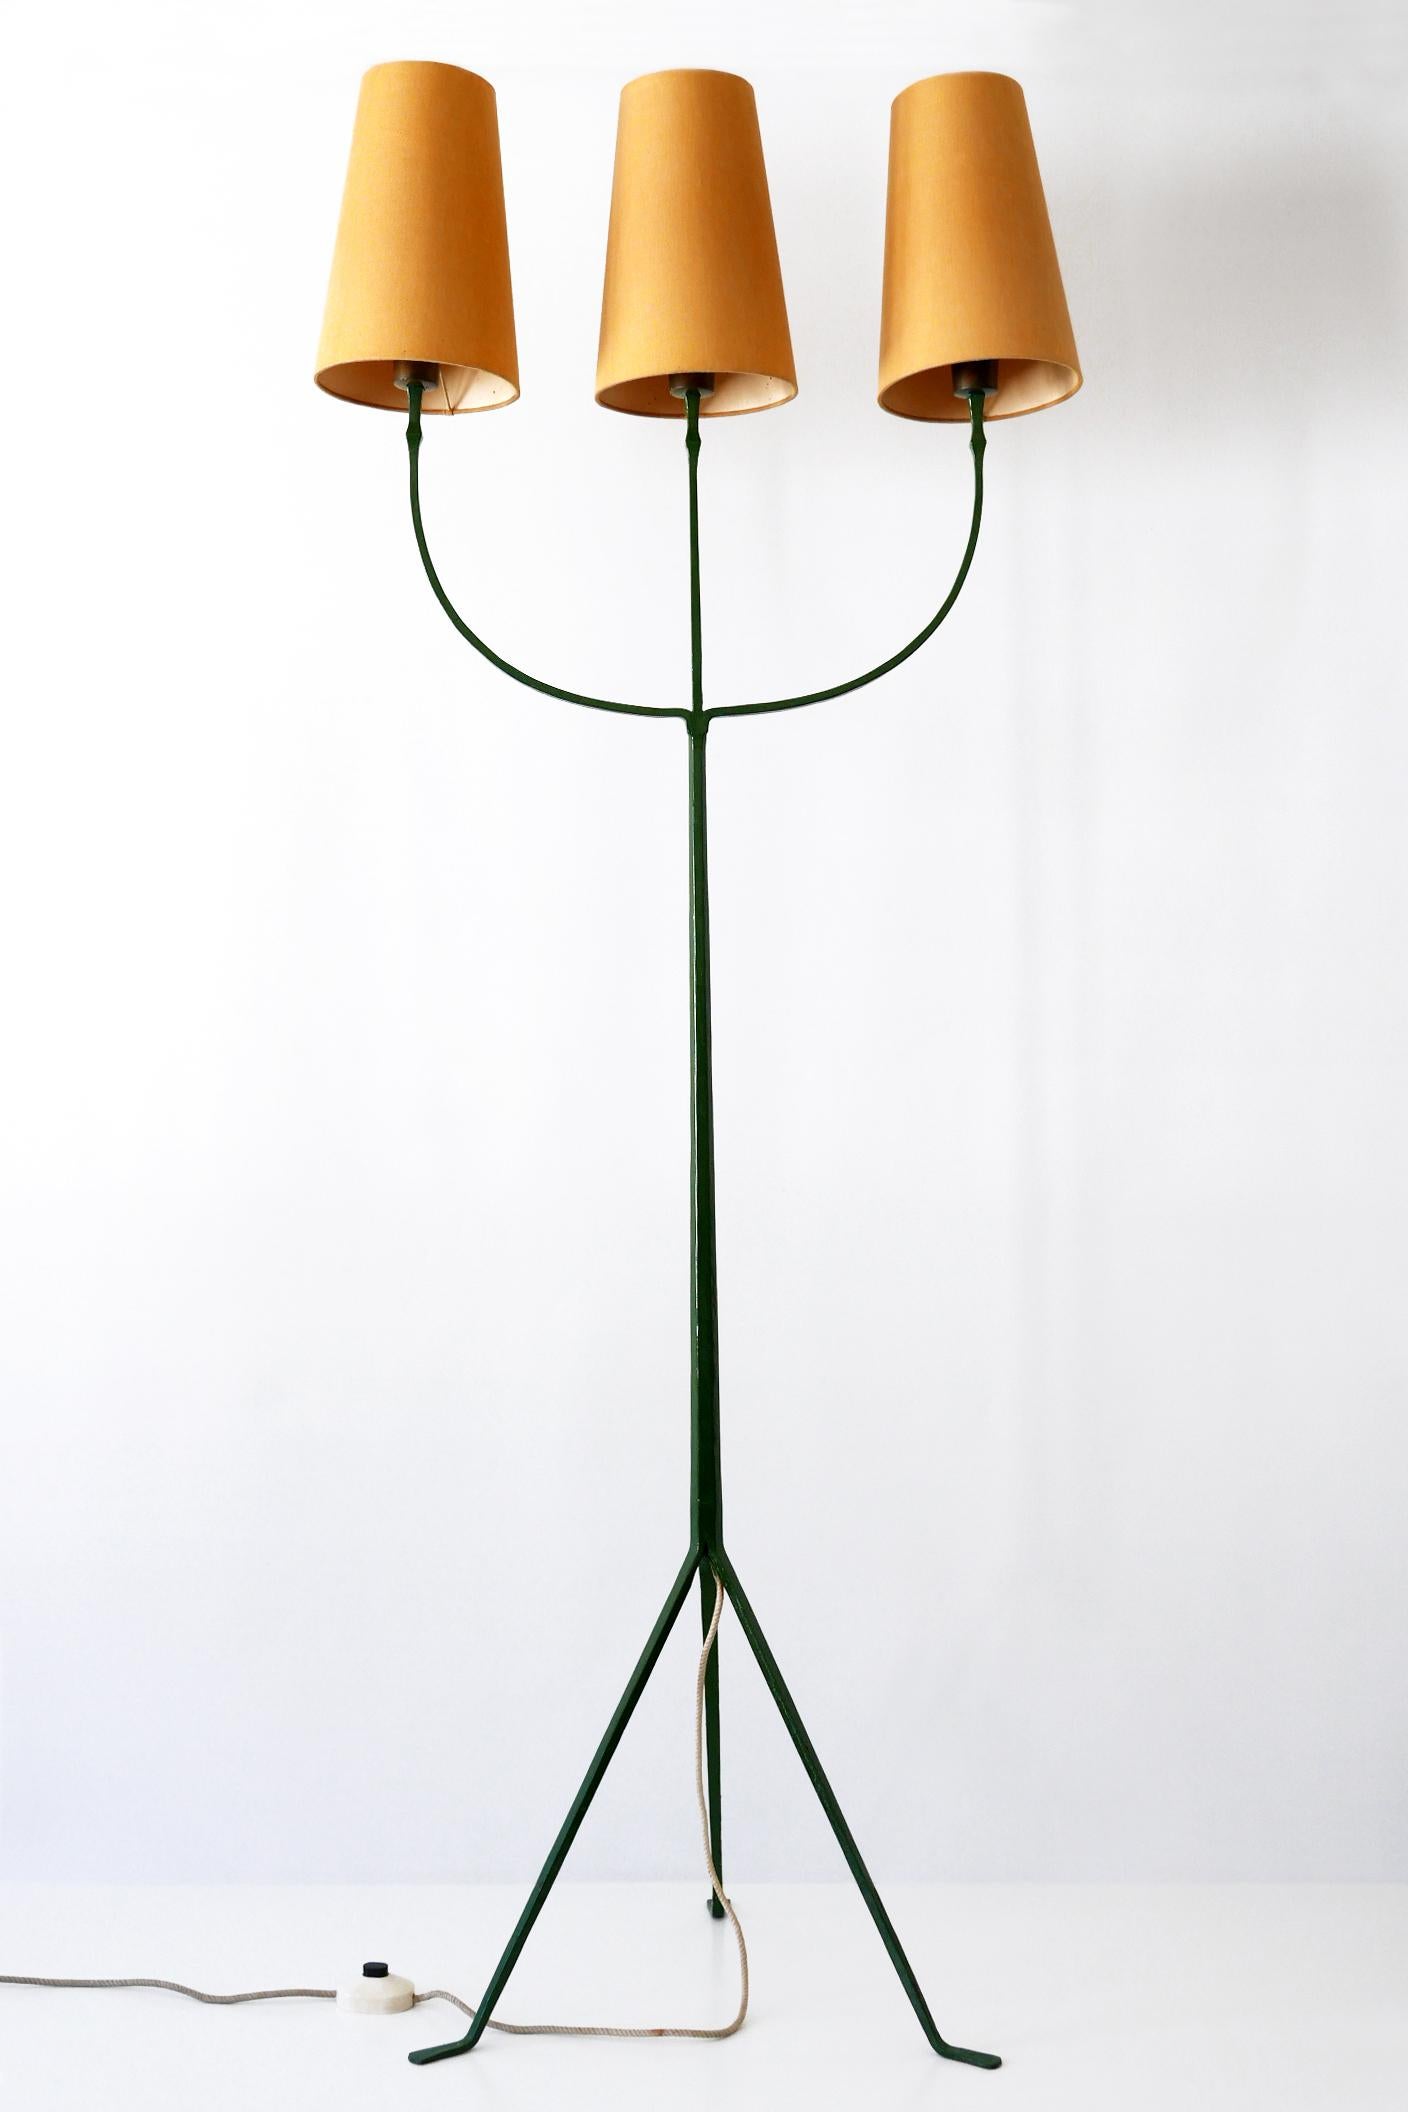 Exceptional Mid-Century Modern Three Flamed Floor Lamp, 1950s For Sale 3